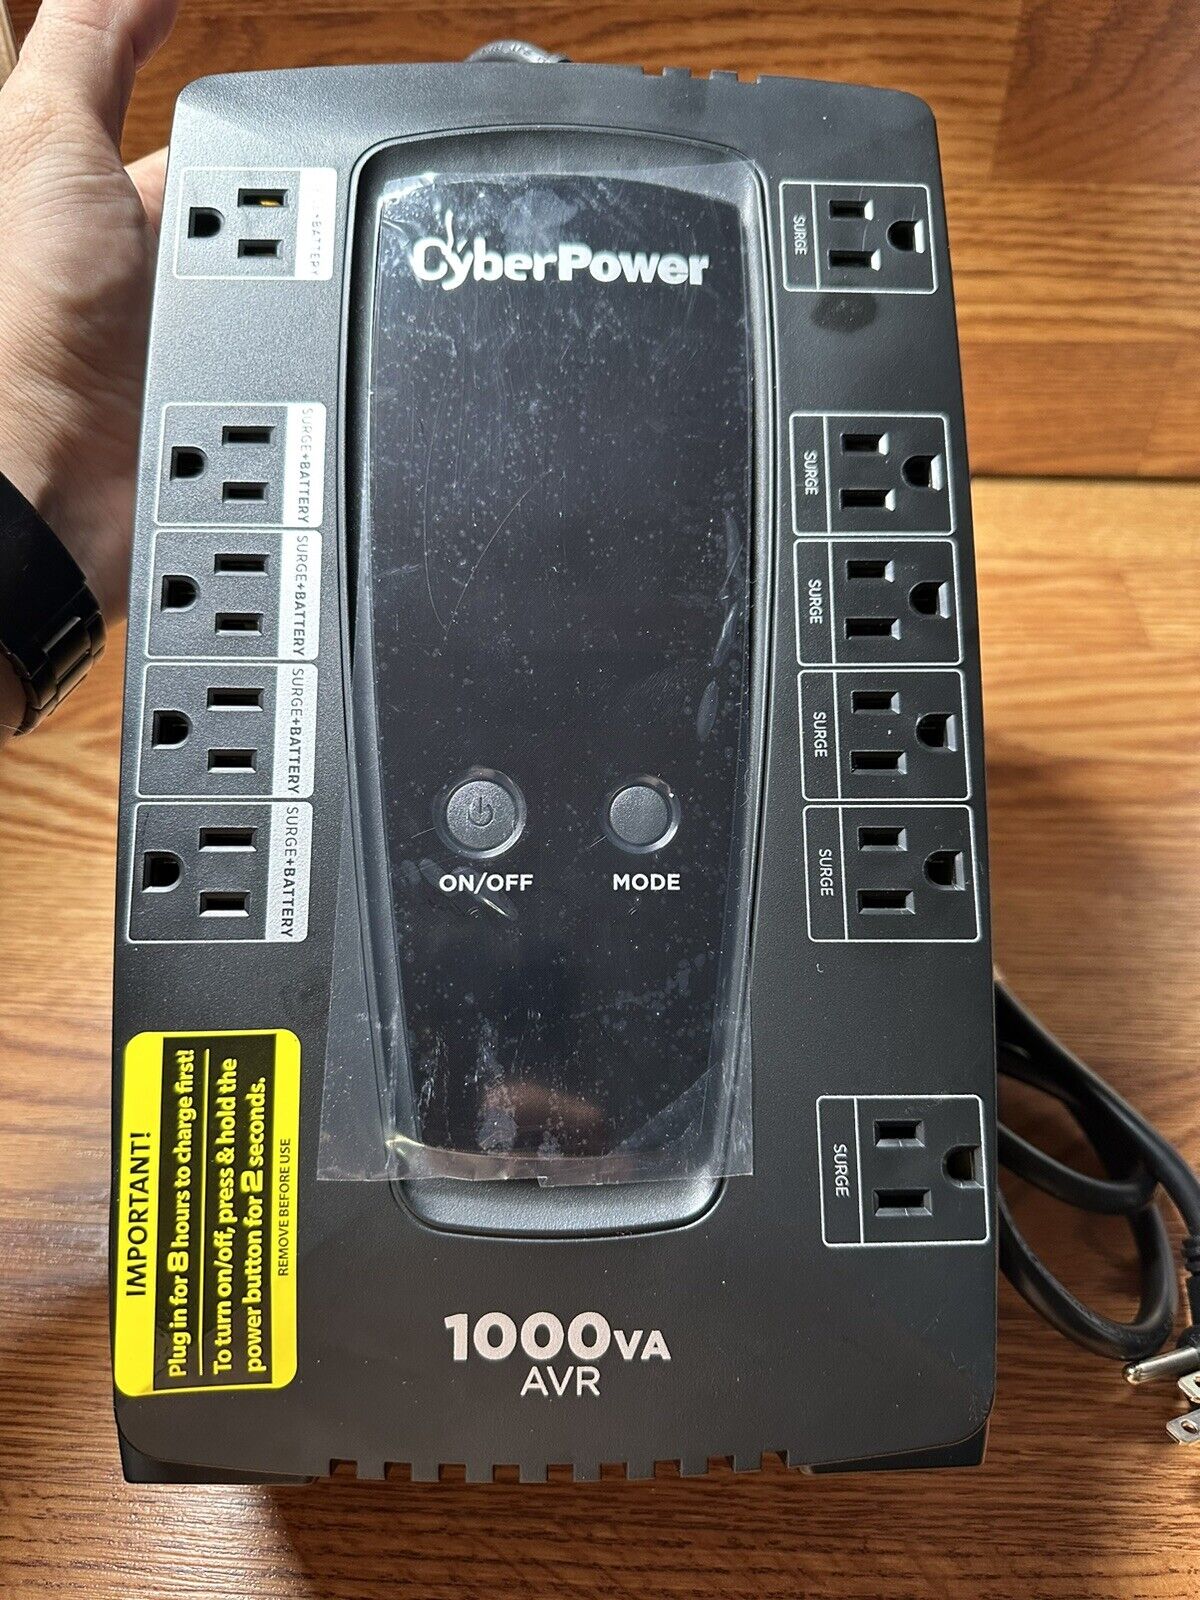 CyberPower 1000VA 120-Volt 11-Outlet UPS Battery Backup with LCD Display